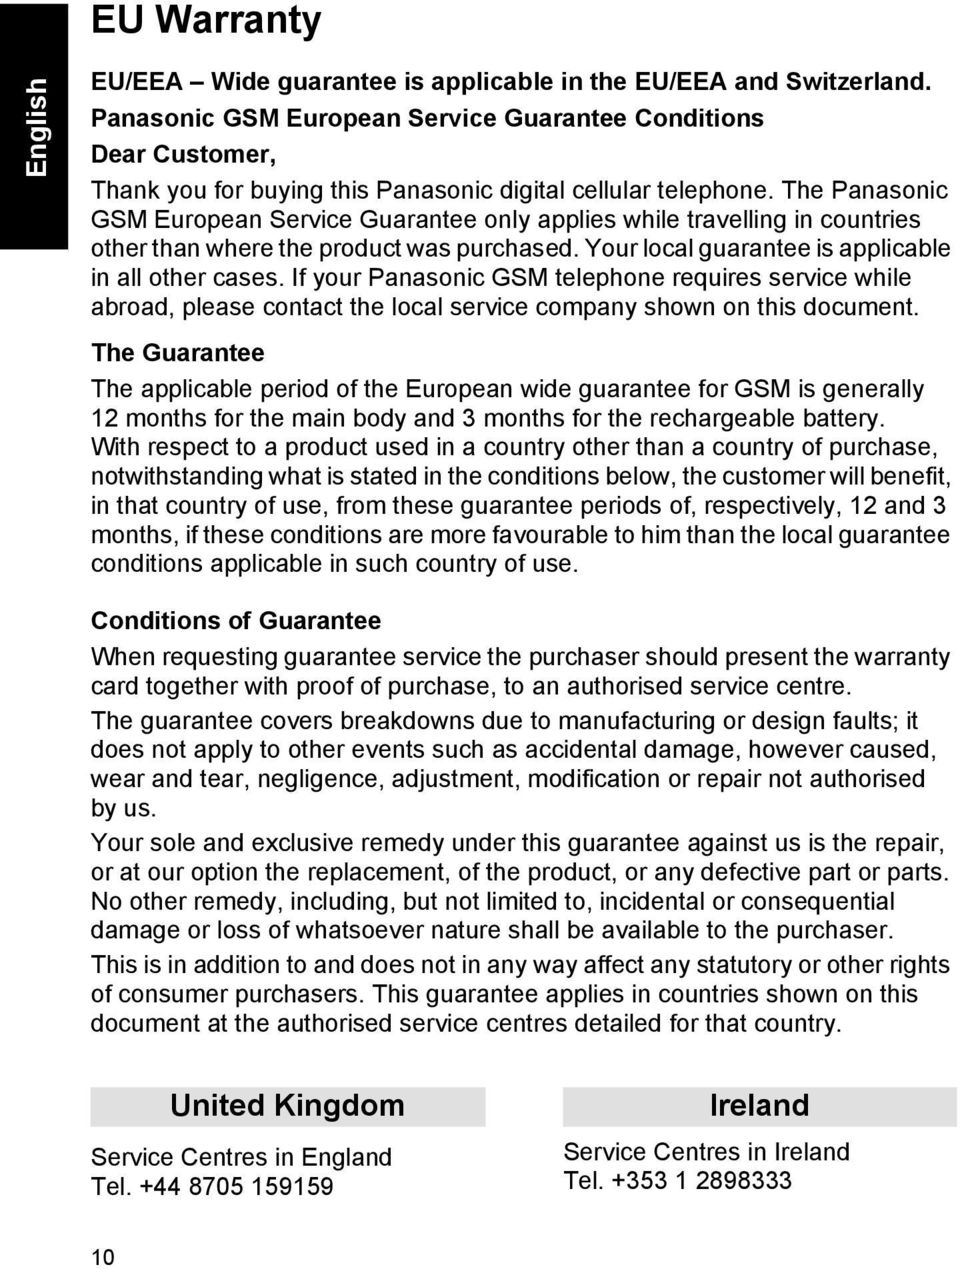 The Panasonic GSM European Service Guarantee only applies while travelling in countries other than where the product was purchased. Your local guarantee is applicable in all other cases.